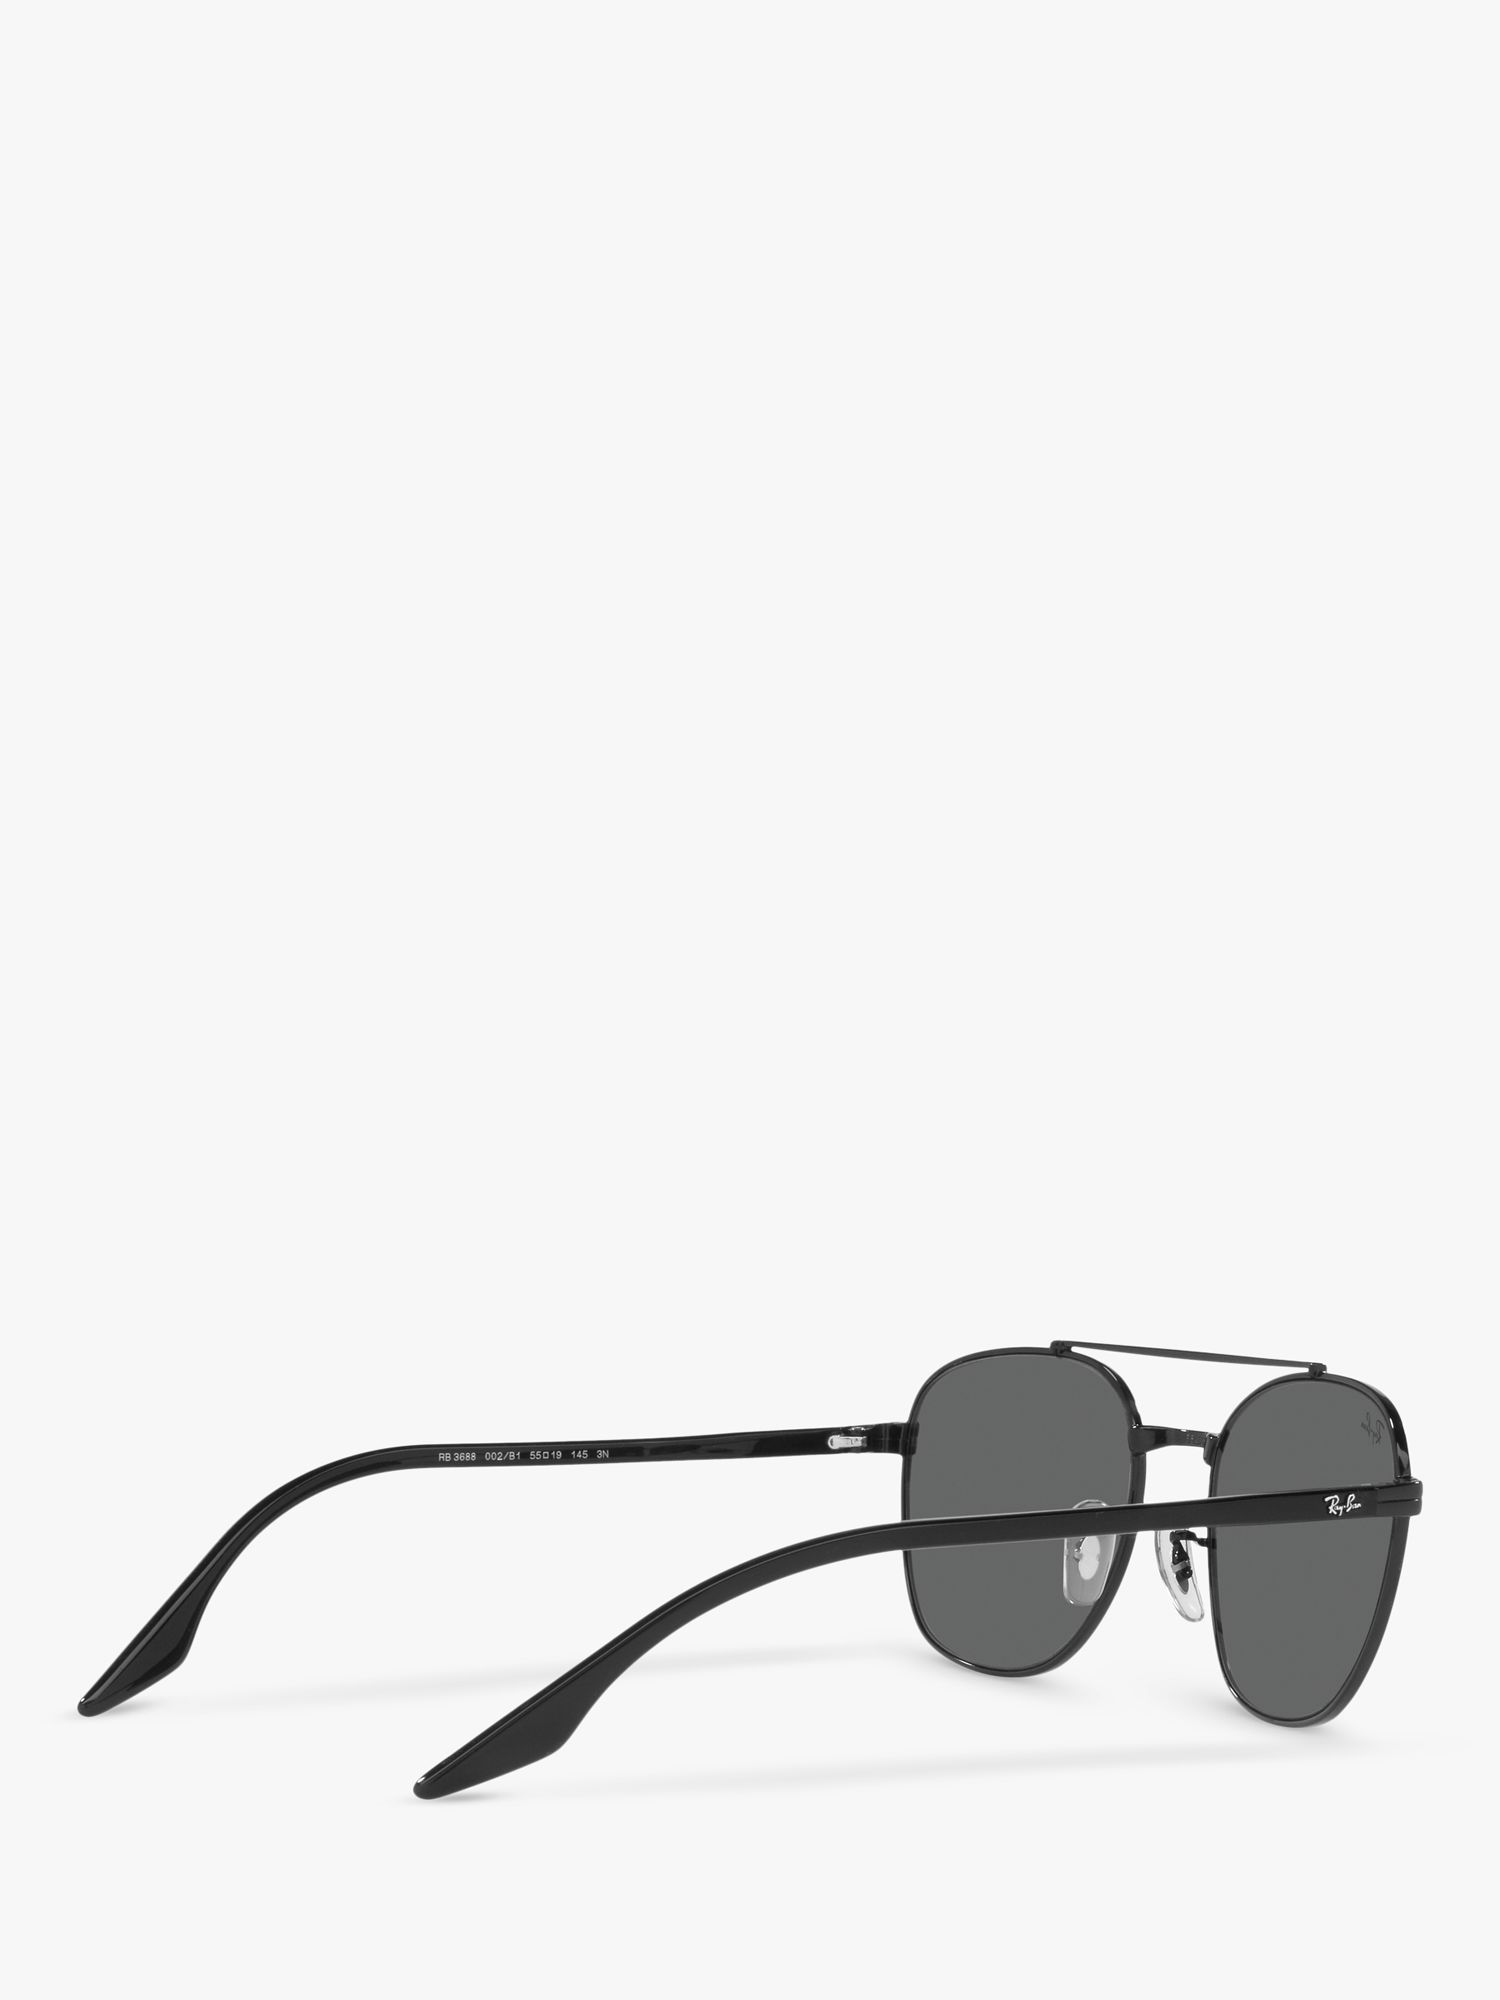 Buy Ray-Ban RB3688 Unisex Square Sunglasses, Black/Grey Online at johnlewis.com